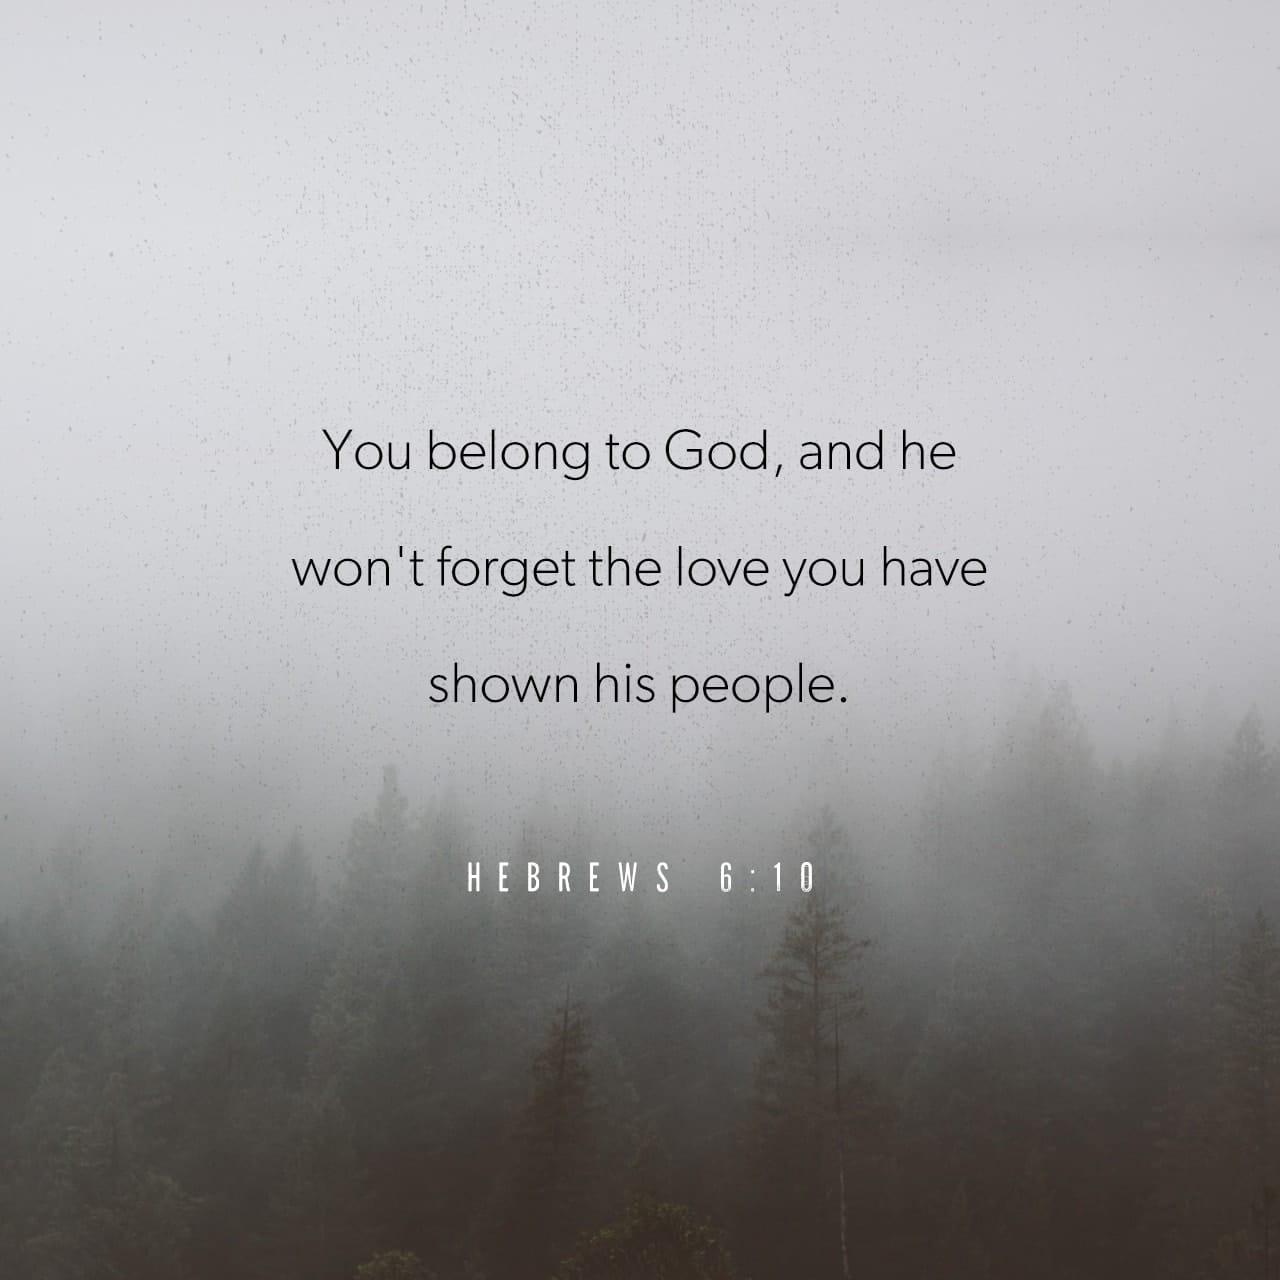 Bible Verse of the Day - day 85 - image 1761 (Hebrews 6:1-20)